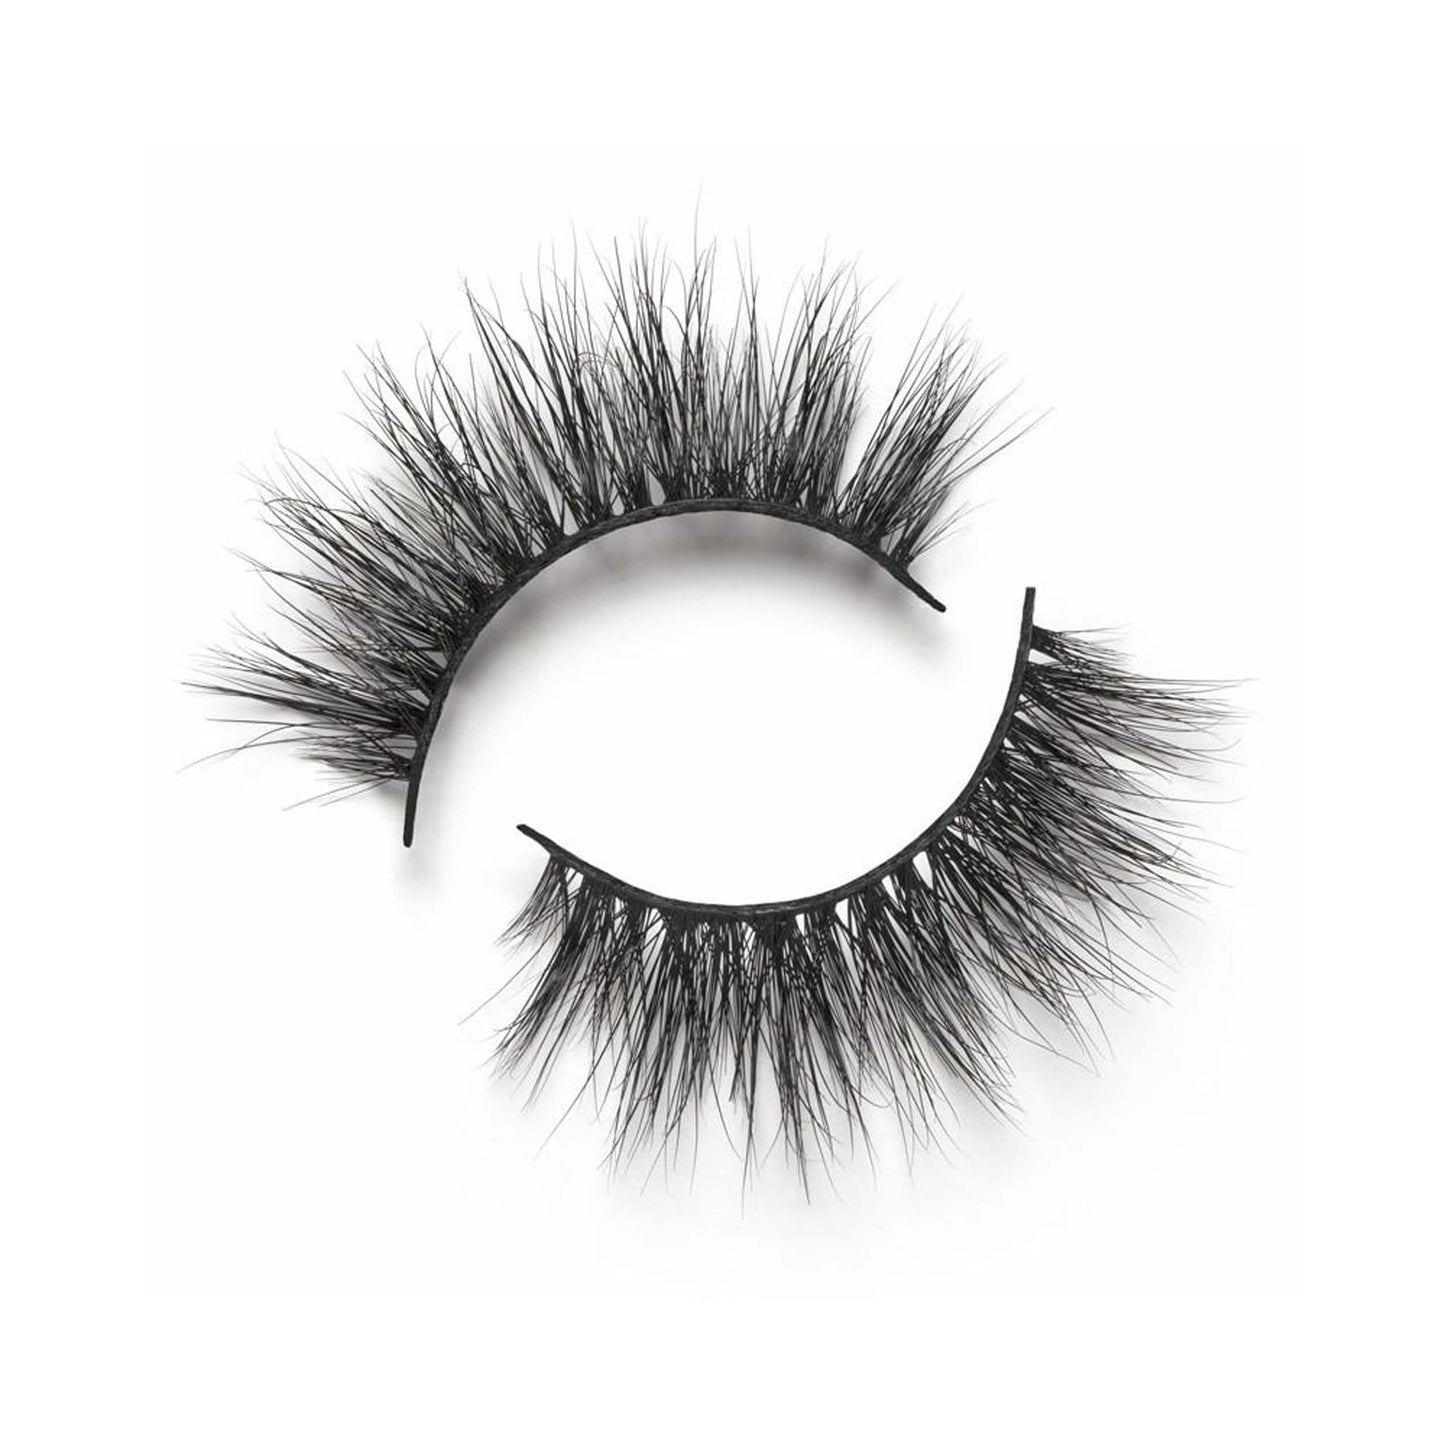 Lilly Lashes Miami Faux Mink Lashes